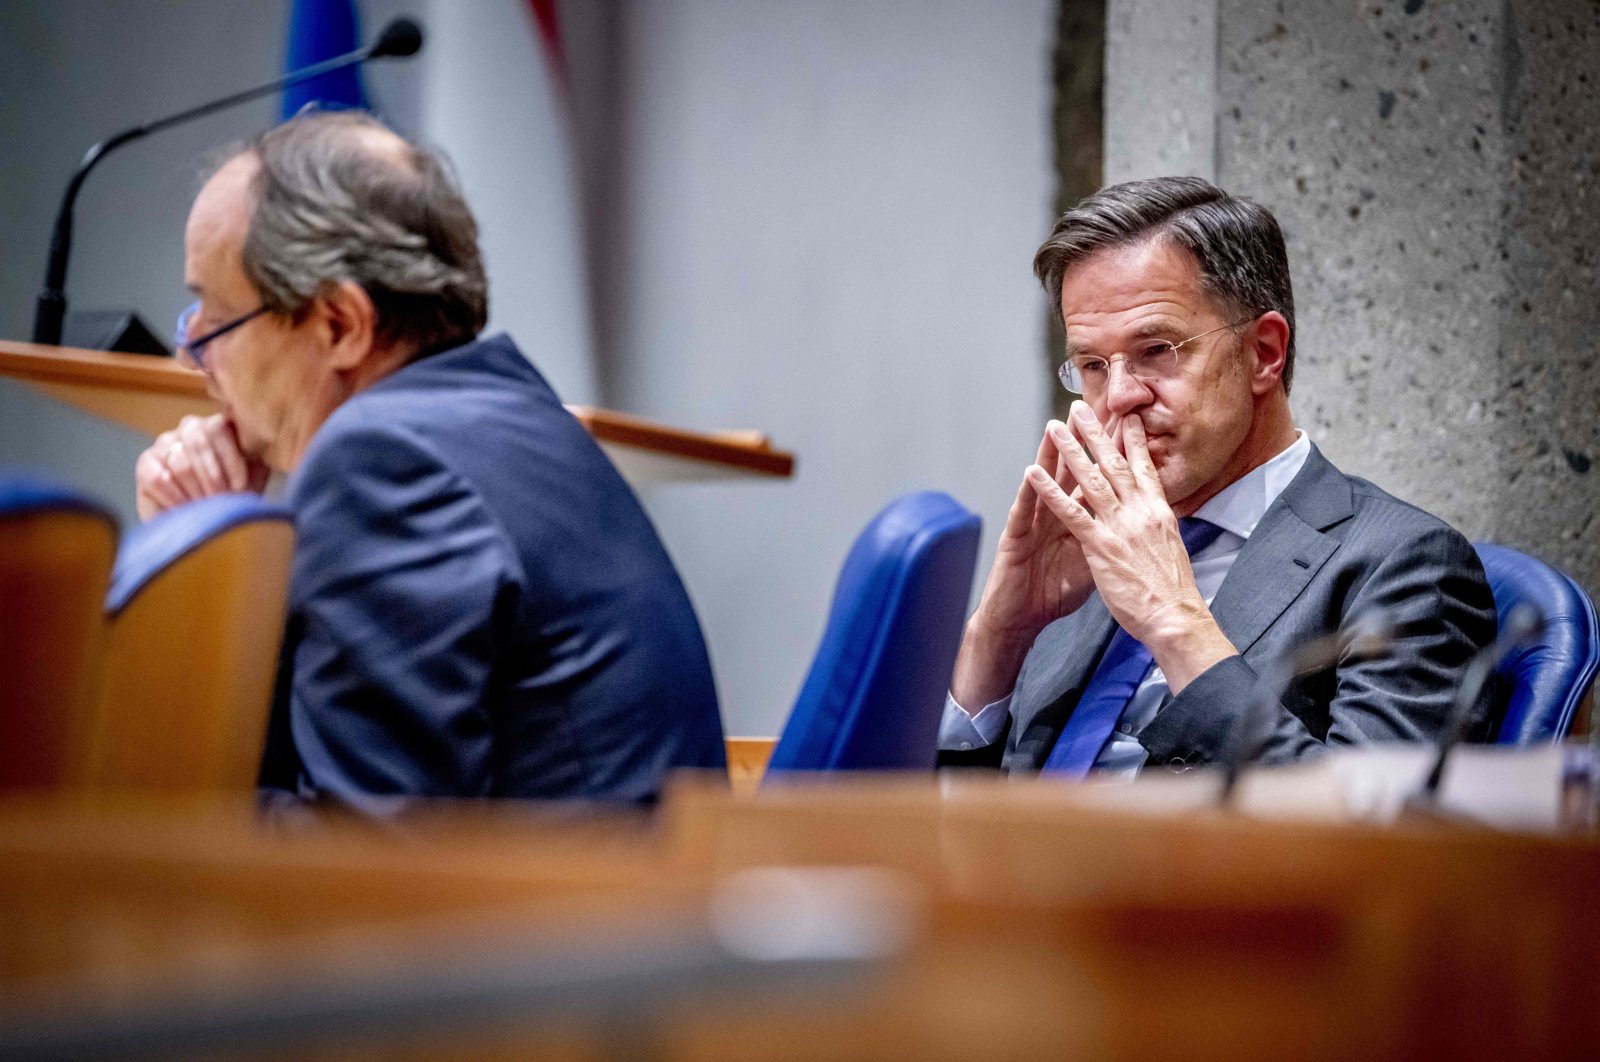 Dutch Prime Minister Mark Rutte and State Secretary for Mining Hans Vijlbrief attend a debate on the report of the Parliamentary Inquiry Committee on Natural Gas Extraction in Groningen, at parliament, The Hague, Holland, June 7, 2023. (AFP Photo)